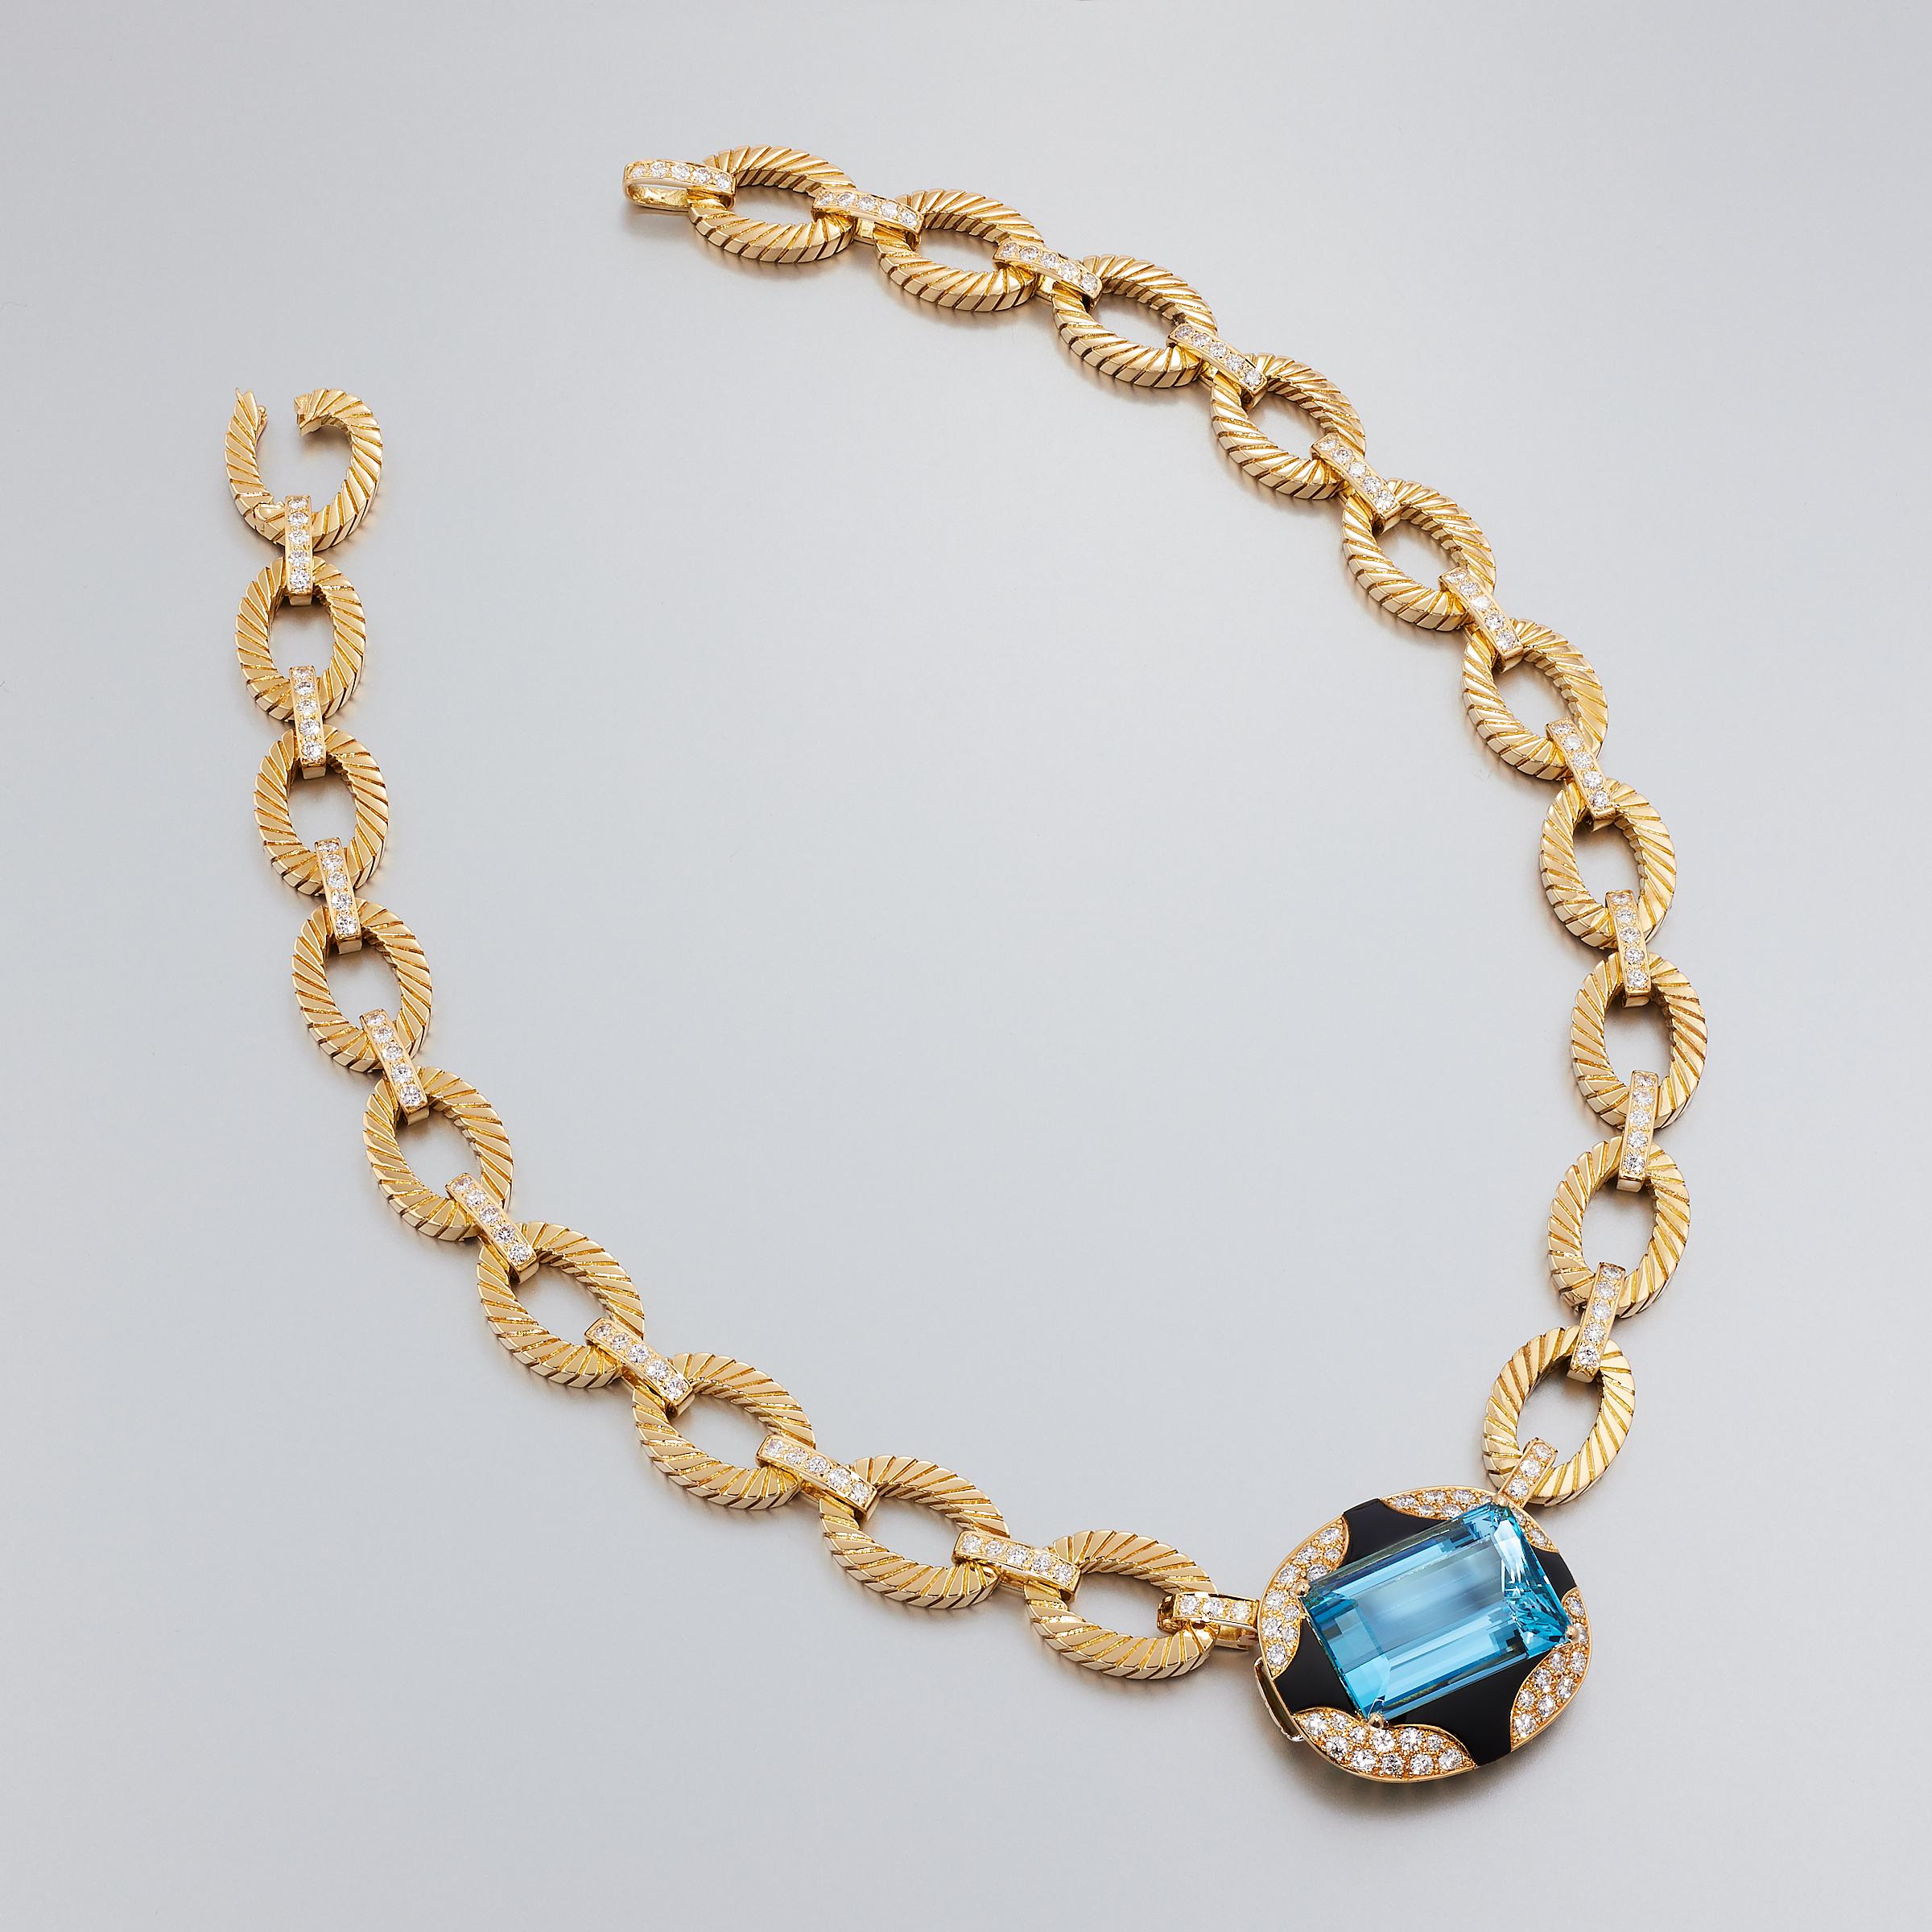 Exceptional one-of-a-kind large aquamarine diamond and black onyx necklace attributed to Mauboussin Paris and set in 18 karat yellow gold. This impressive necklace is a vintage creation dating to 1980s and is emblematic of the bold French